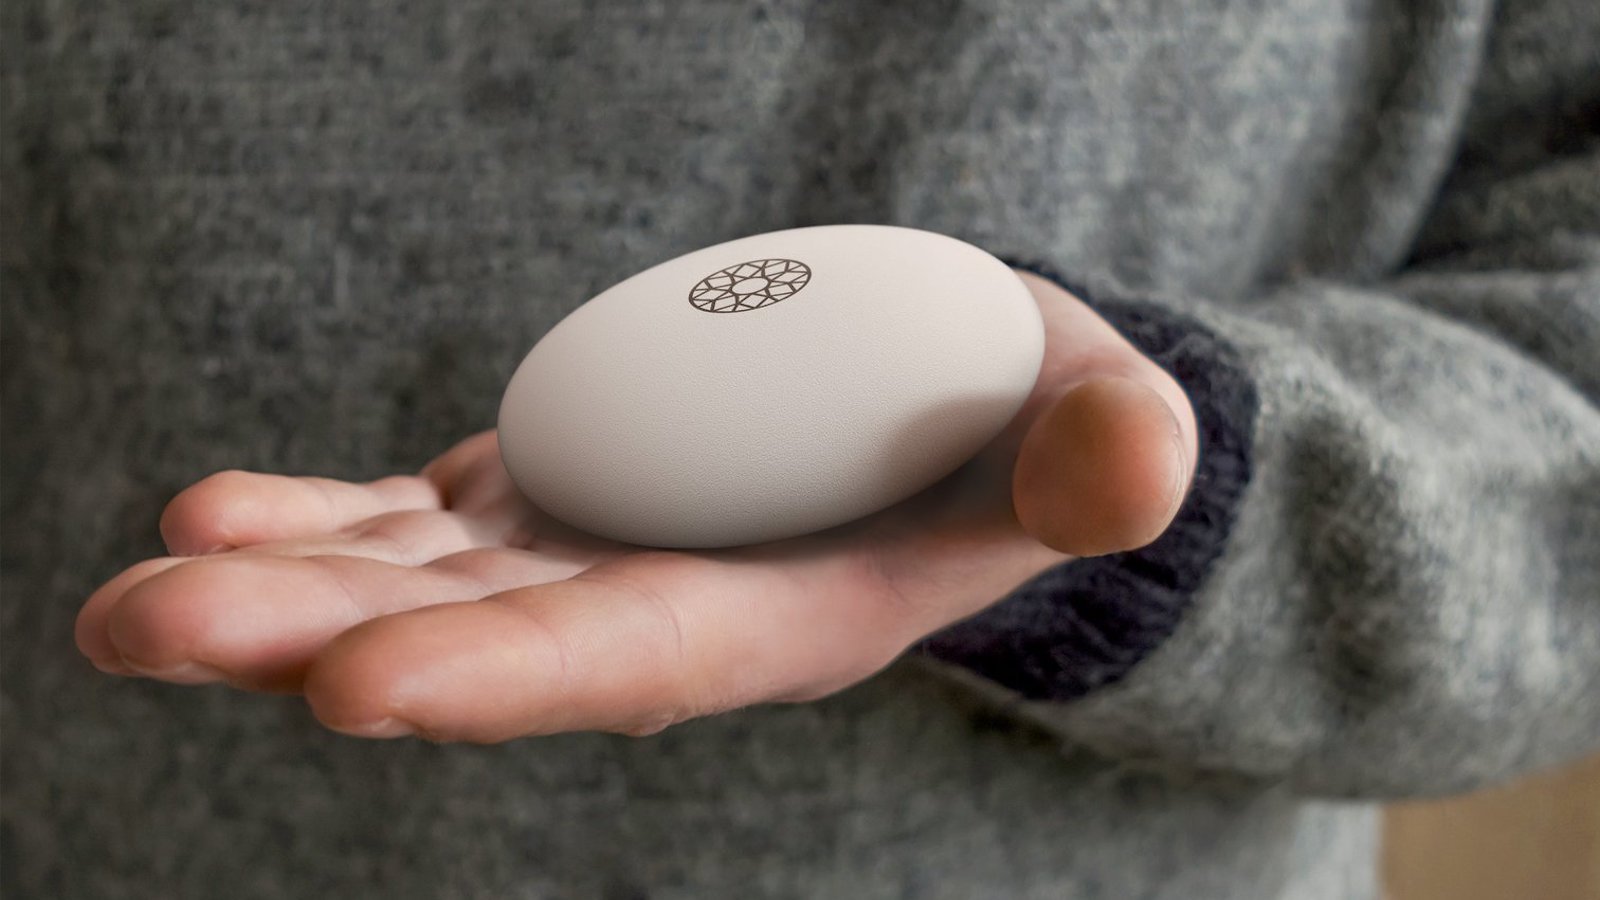 Nordic Hygge Värme heater & detachable hand warmer holds a temperature up to 122° F